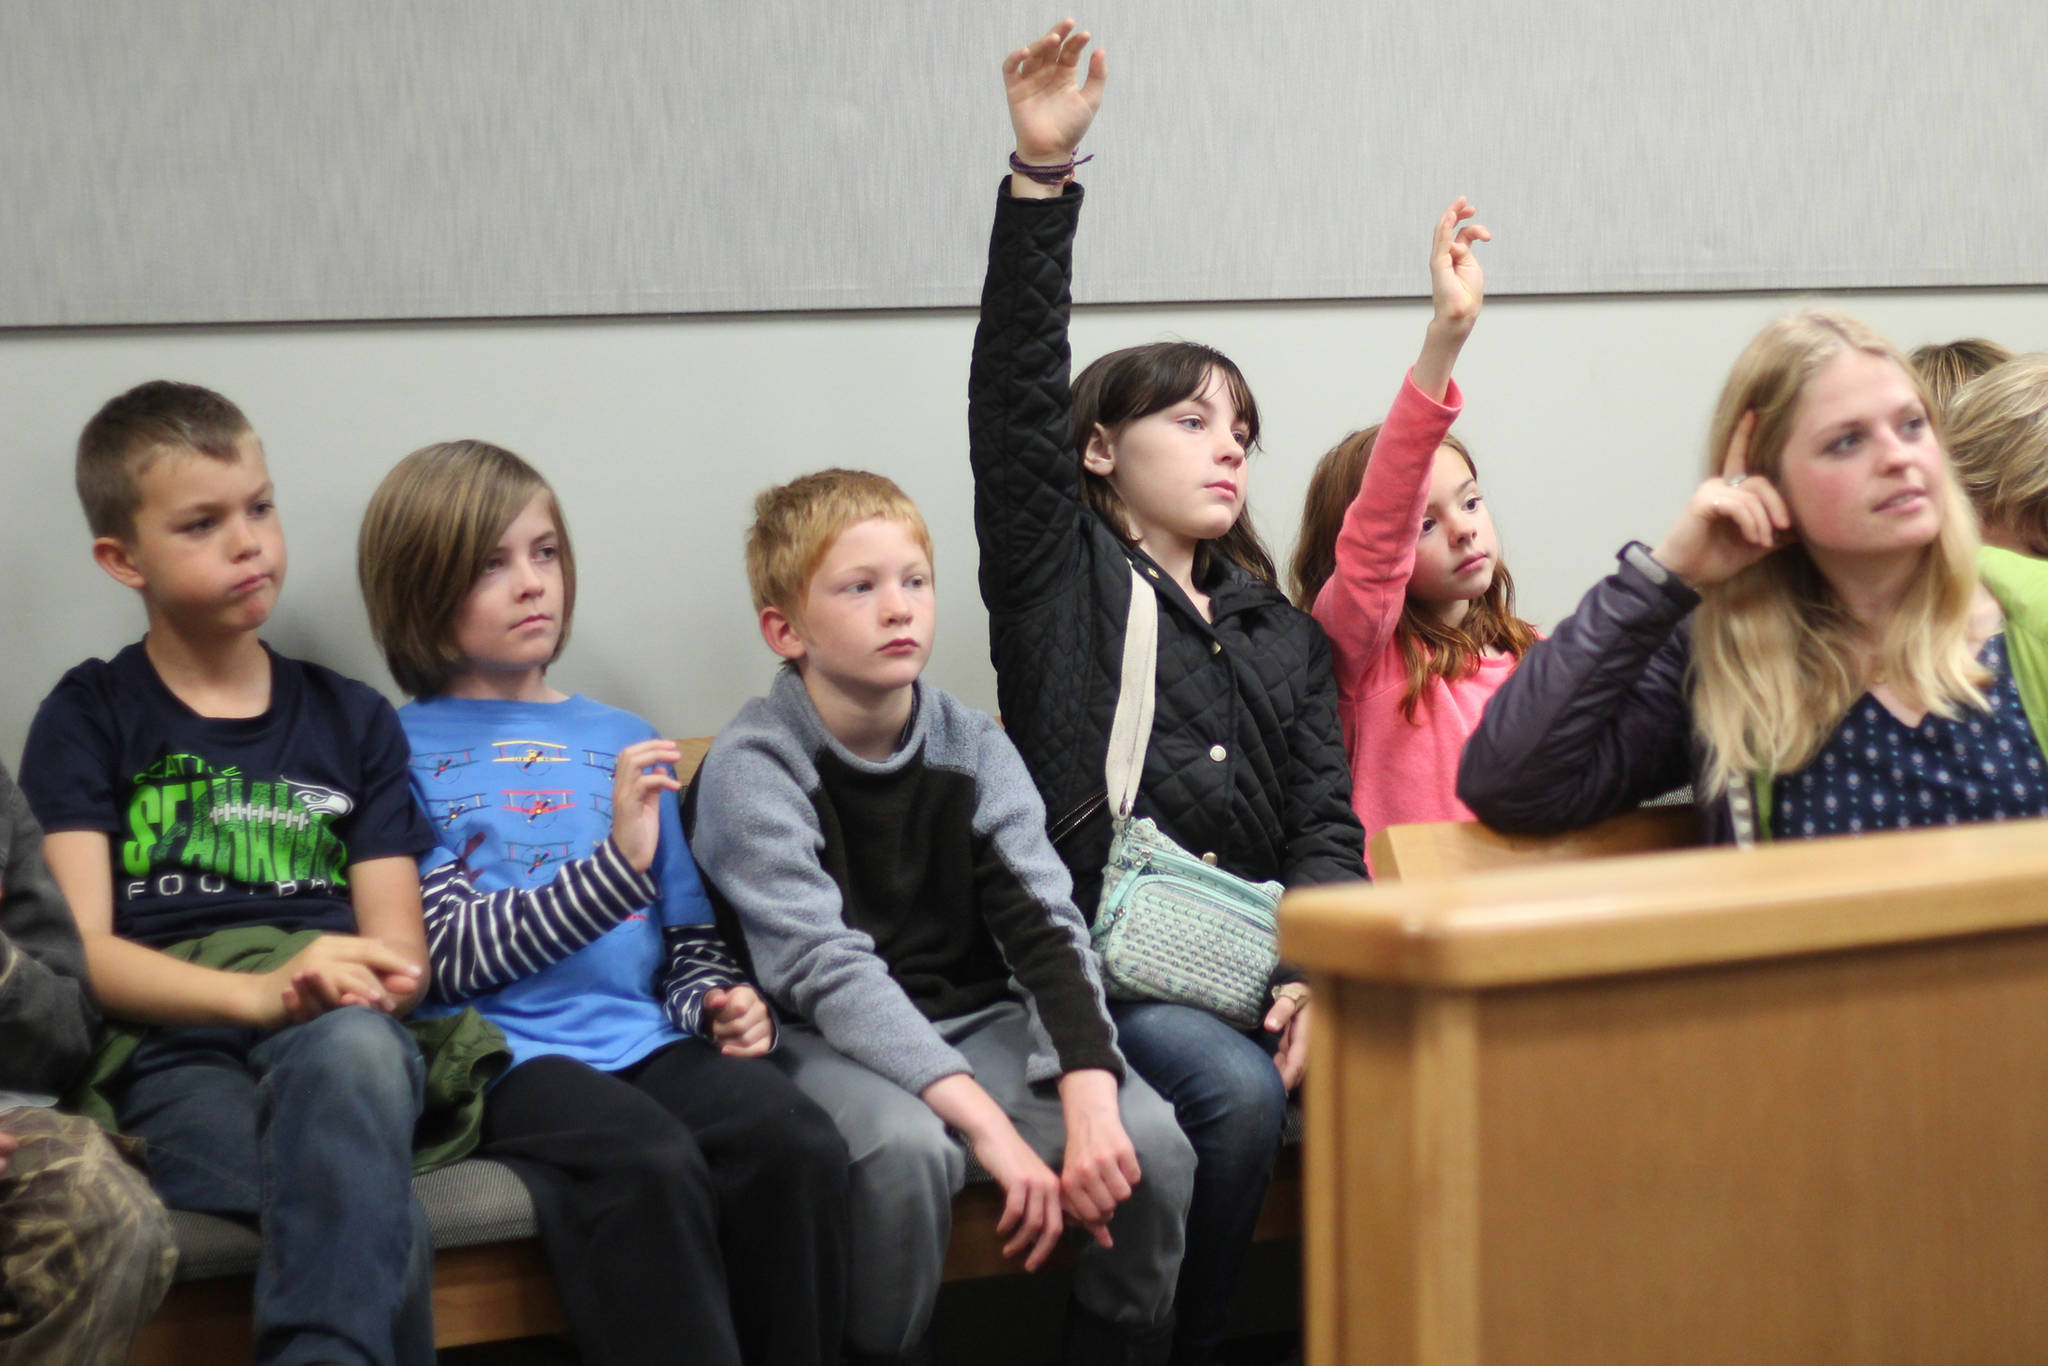 Grace Berumen and Madelyn Madrid raise their hands to ask questions during an Oct. 8, 2018 field trip to the Homer Courthouse in Homer, Alaska. They and their fellow Fireweed Academy classmates learned about the law and the inn workings of the courthouse. (Photo by Megan Pacer/Homer News)